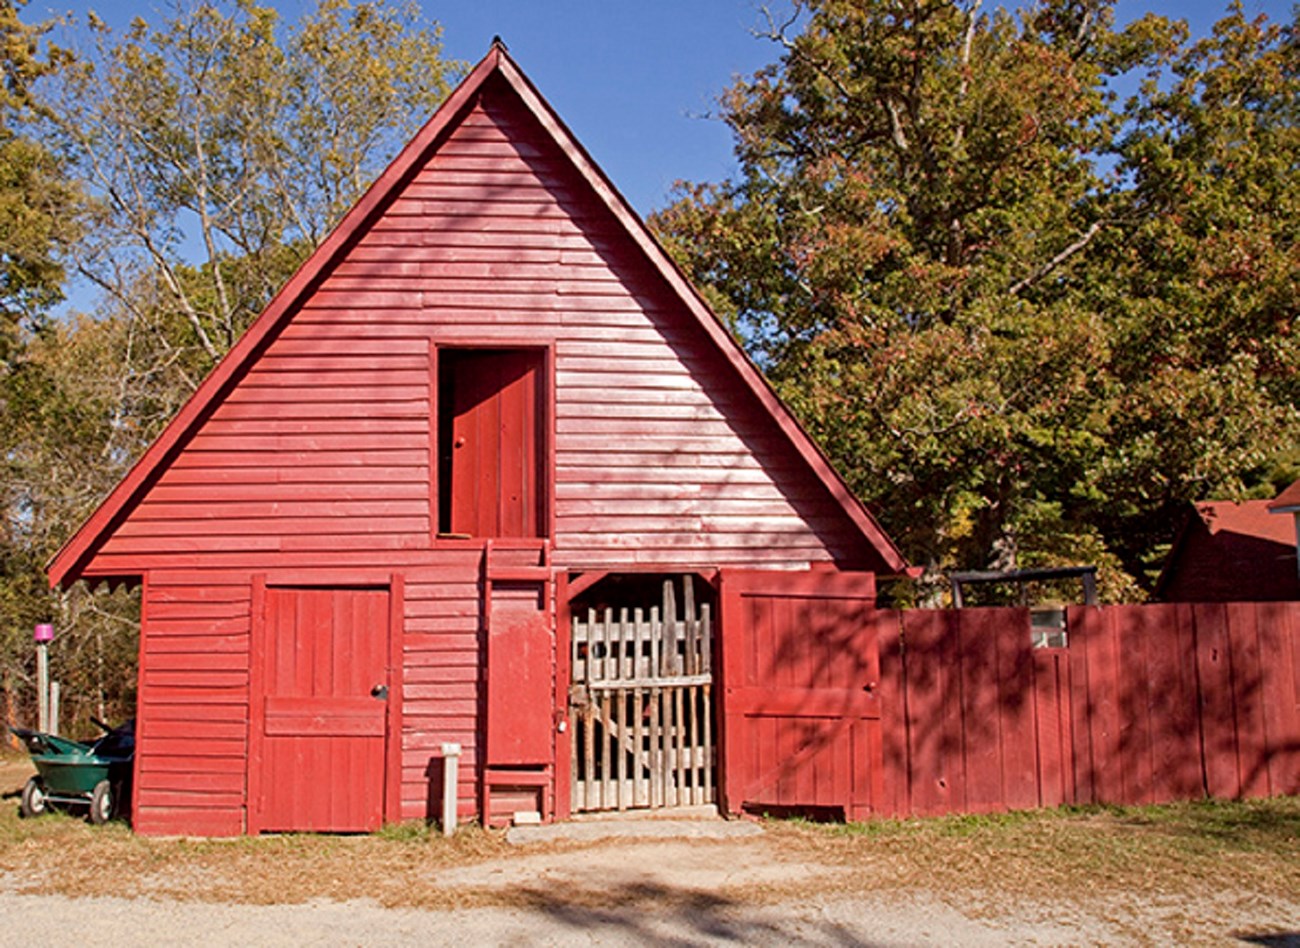 A small red A frame barn with a wooden fenced play yard